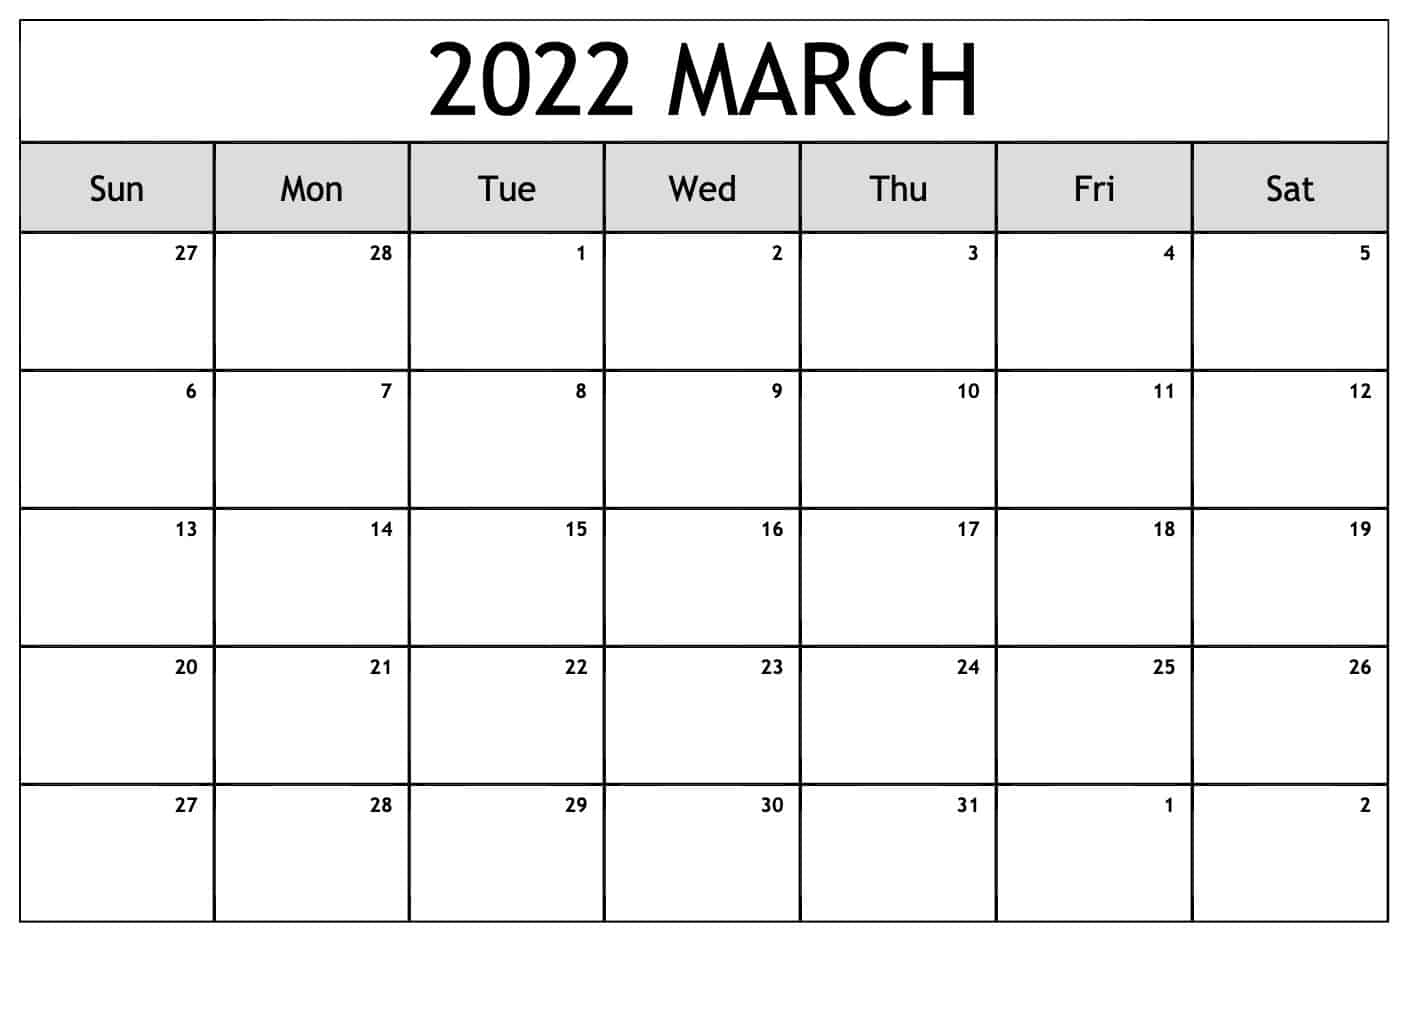 2022 March Calendar with Suitable Space